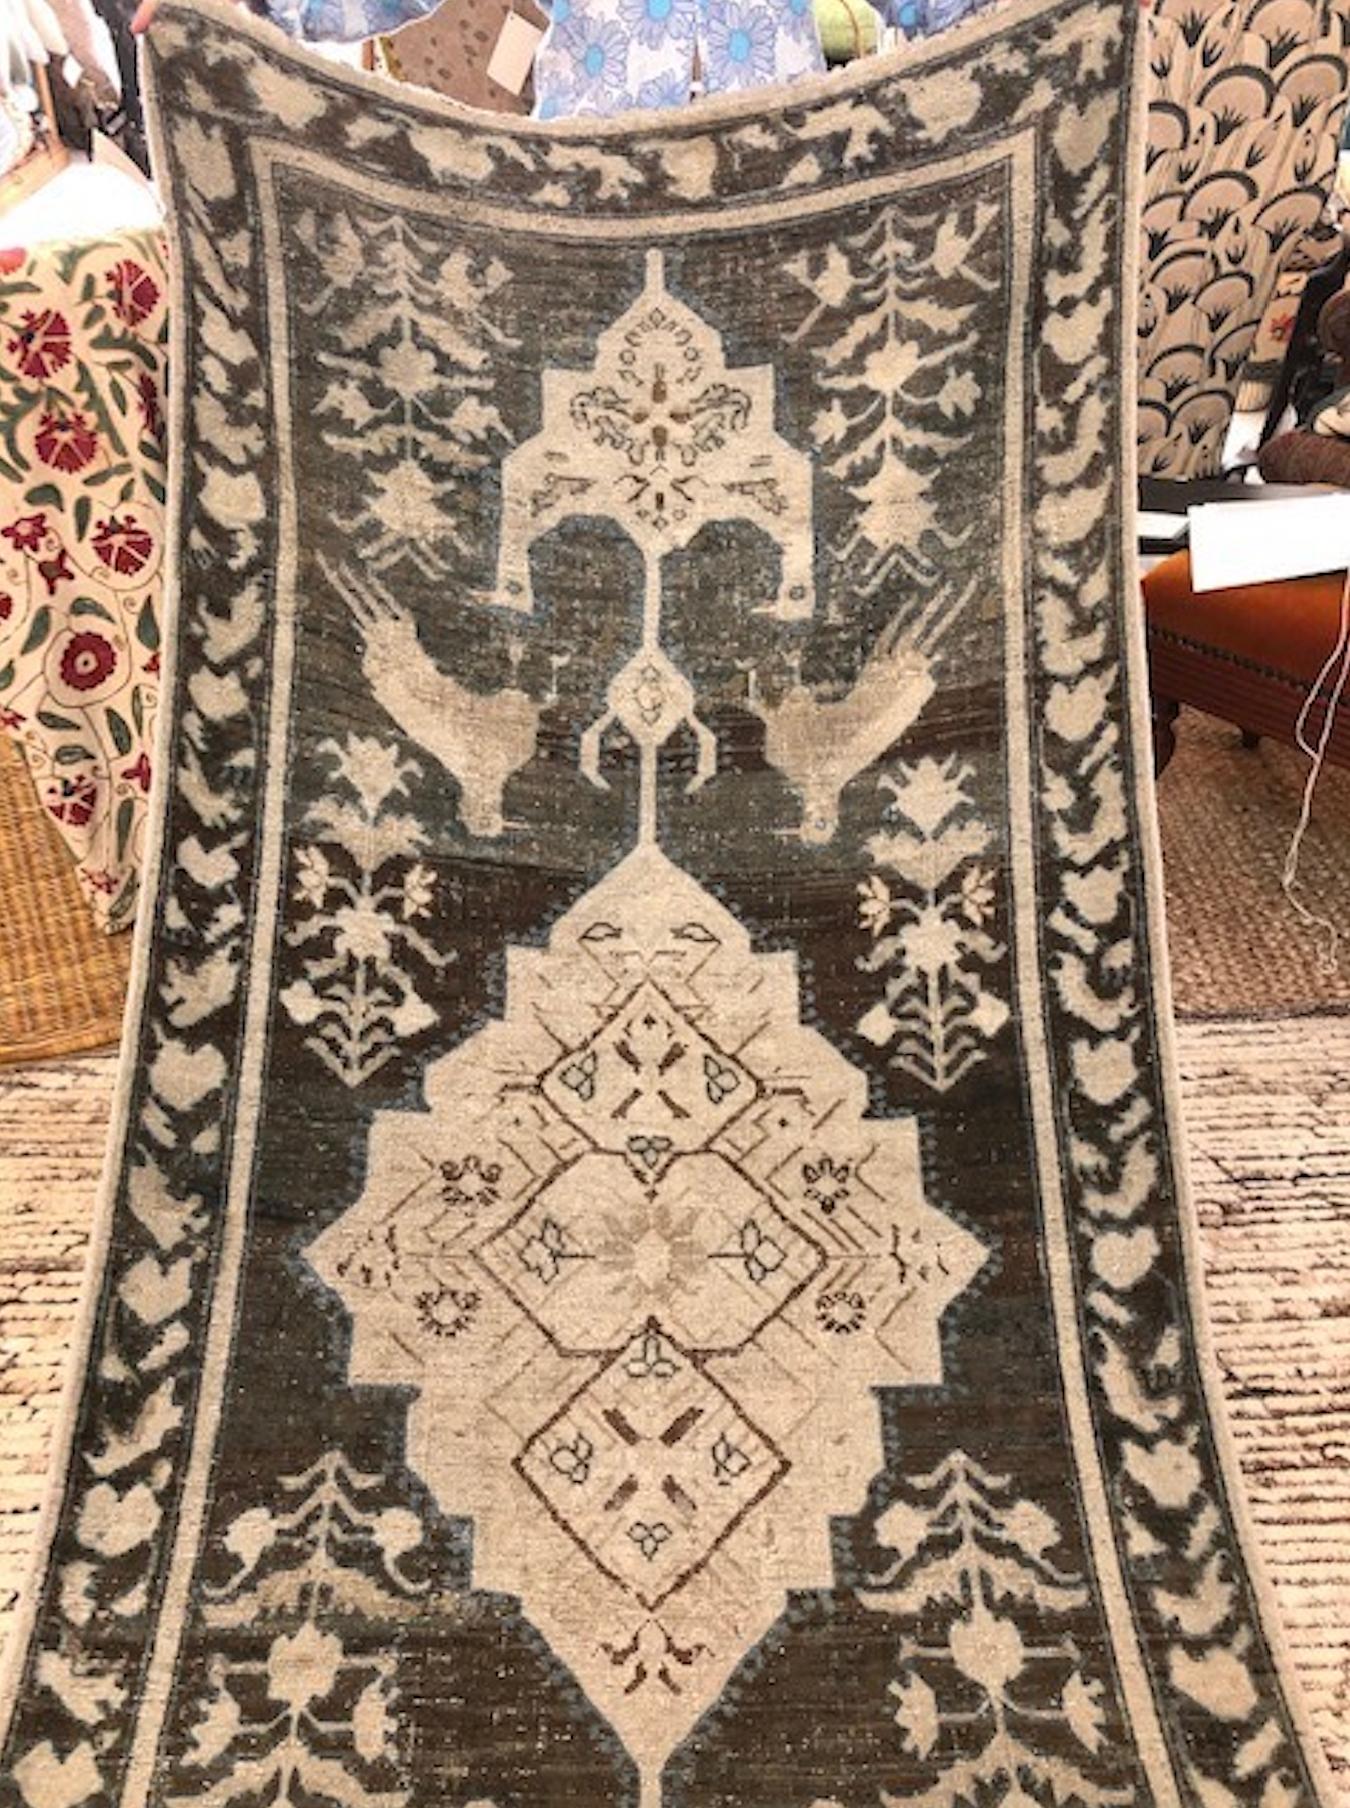 Orgin: Persia
Dimensions: 18’ x 3’7”
Age: 1920’s
Design: Anatolian
Material: 100% Wool-pile
Color: Charcoal, Grey, Beige, Brown

258

Persian rugs and carpets of various types were woven in parallel by nomadic tribes in village and town